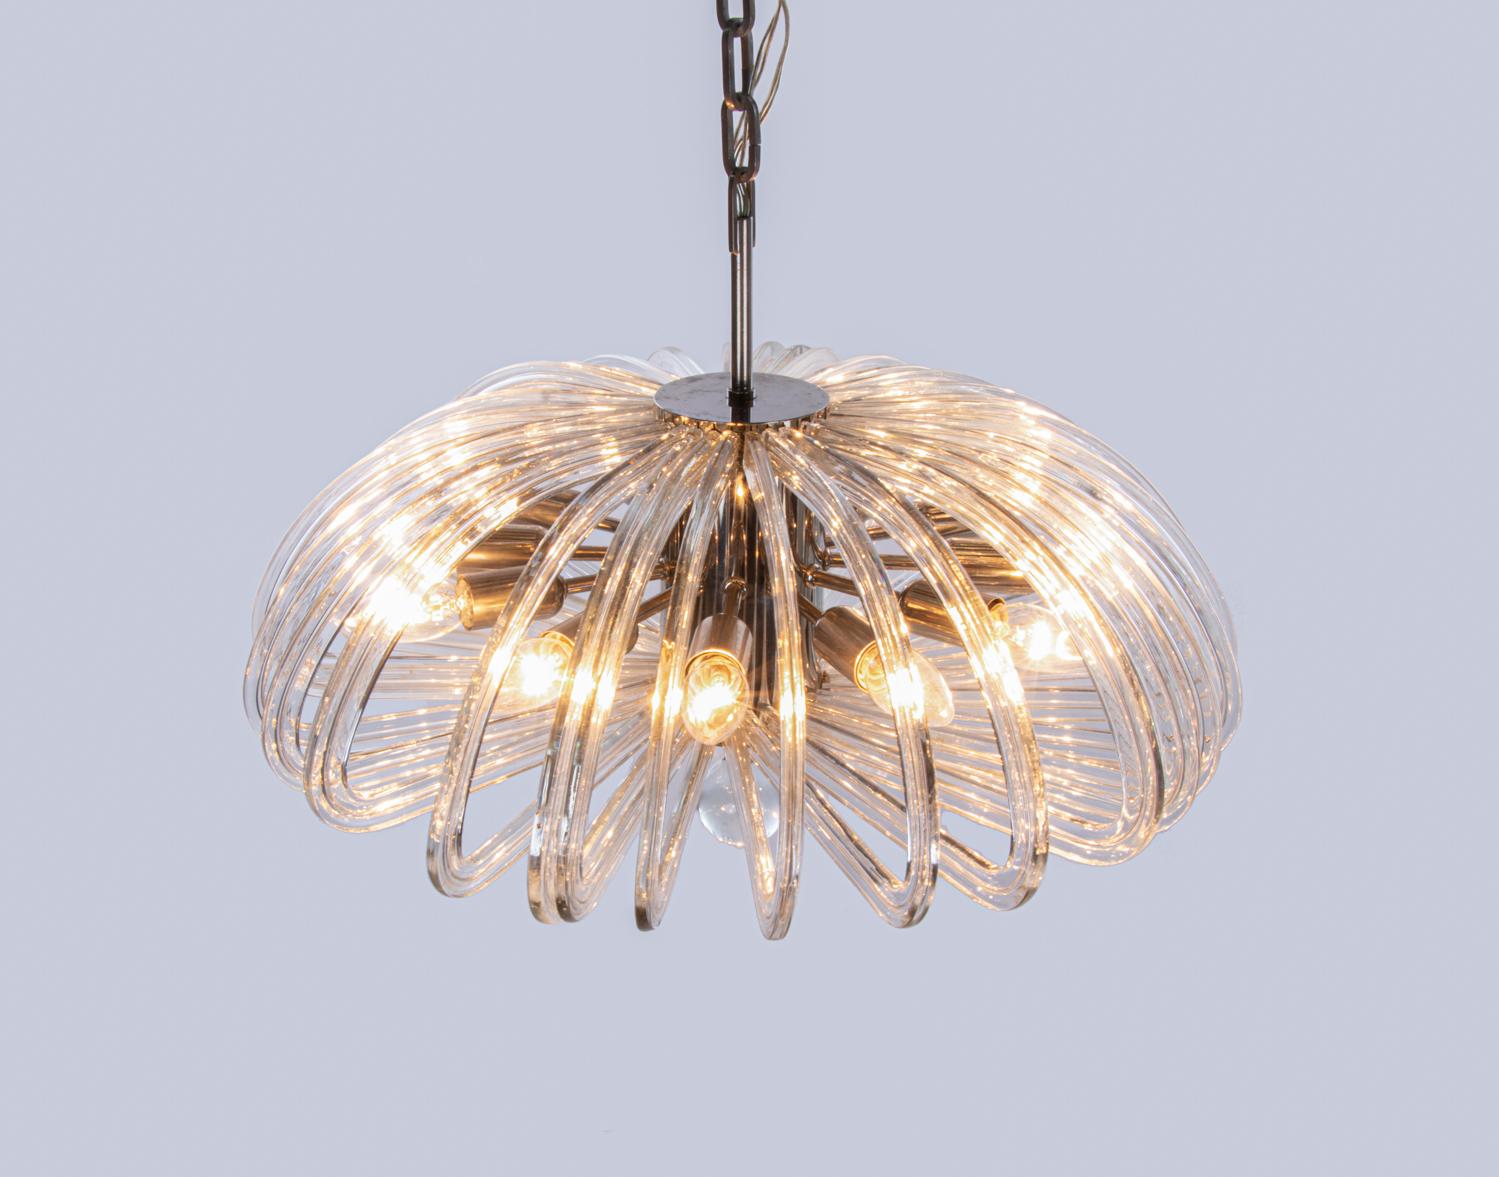 Elegant, wave-shaped chandelier with an incomparable, unique character thanks to its nickel base and curved arms made of clear crystal glass. Has 12 sockets. In very good condition. Chandelier illuminates beautifully and offers a lot of light. Gem